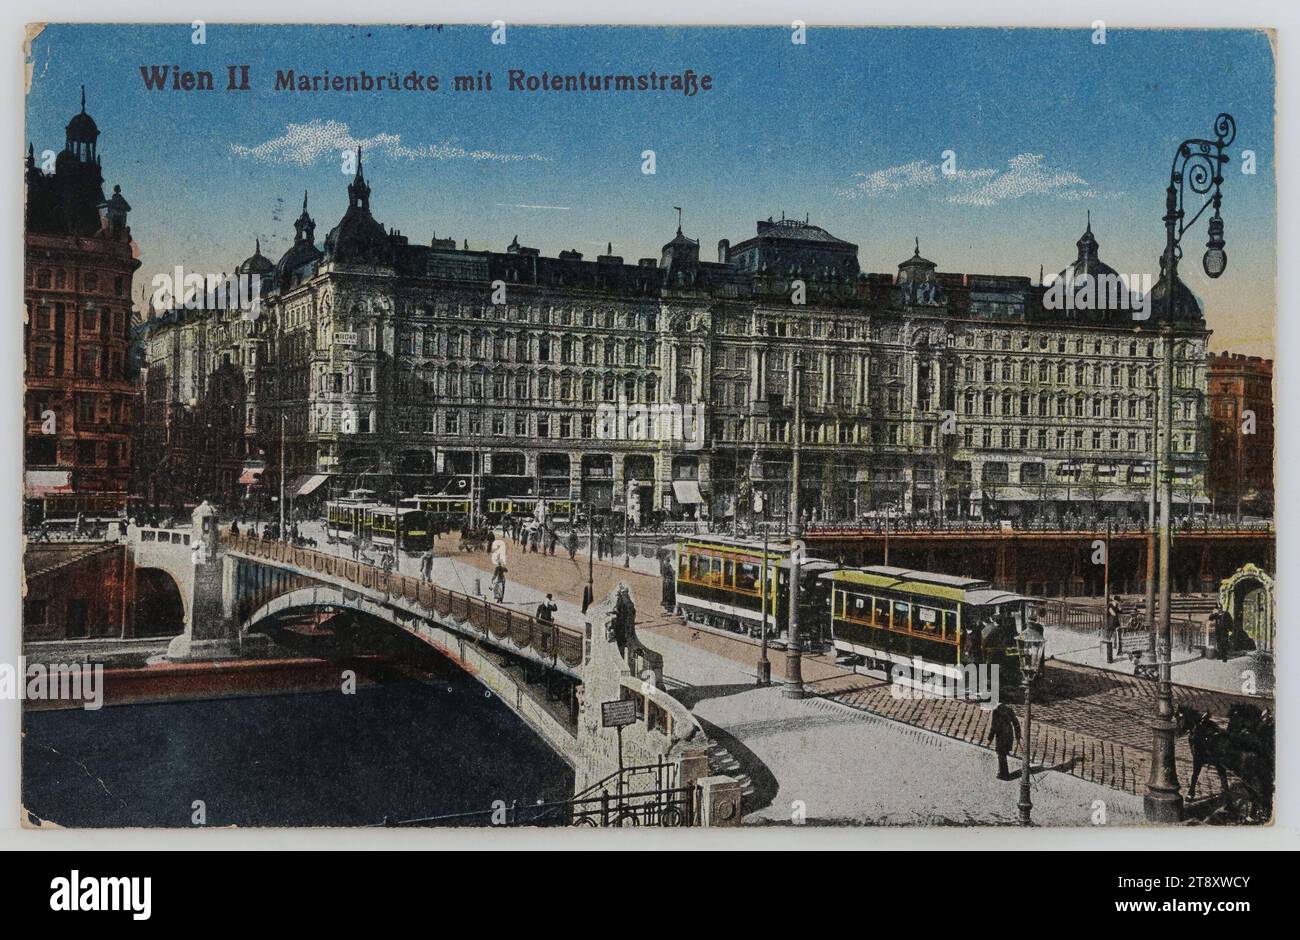 Danube Canal - Marienbrücke, view towards Rotenturmstraße, picture postcard, Unknown, 1919, coated paperboard, autochrome print, Inscription, FROM, Vienna, TO, Graz, ADDRESS, Dear, Fräulein, Buchhalterin, Graz, Stubenberggasse 6, MESSAGE, To show you how beautiful our dear Vienna city is, I send you this card. I am your sincere friend and [signature], 22., X.19., Danube, Public Transport, Media and Communication, Donaukanal, traffic and transport, Postcards with transliteration, street, the usual house or row of houses, flat-building, apartment house, house combined with store Stock Photo